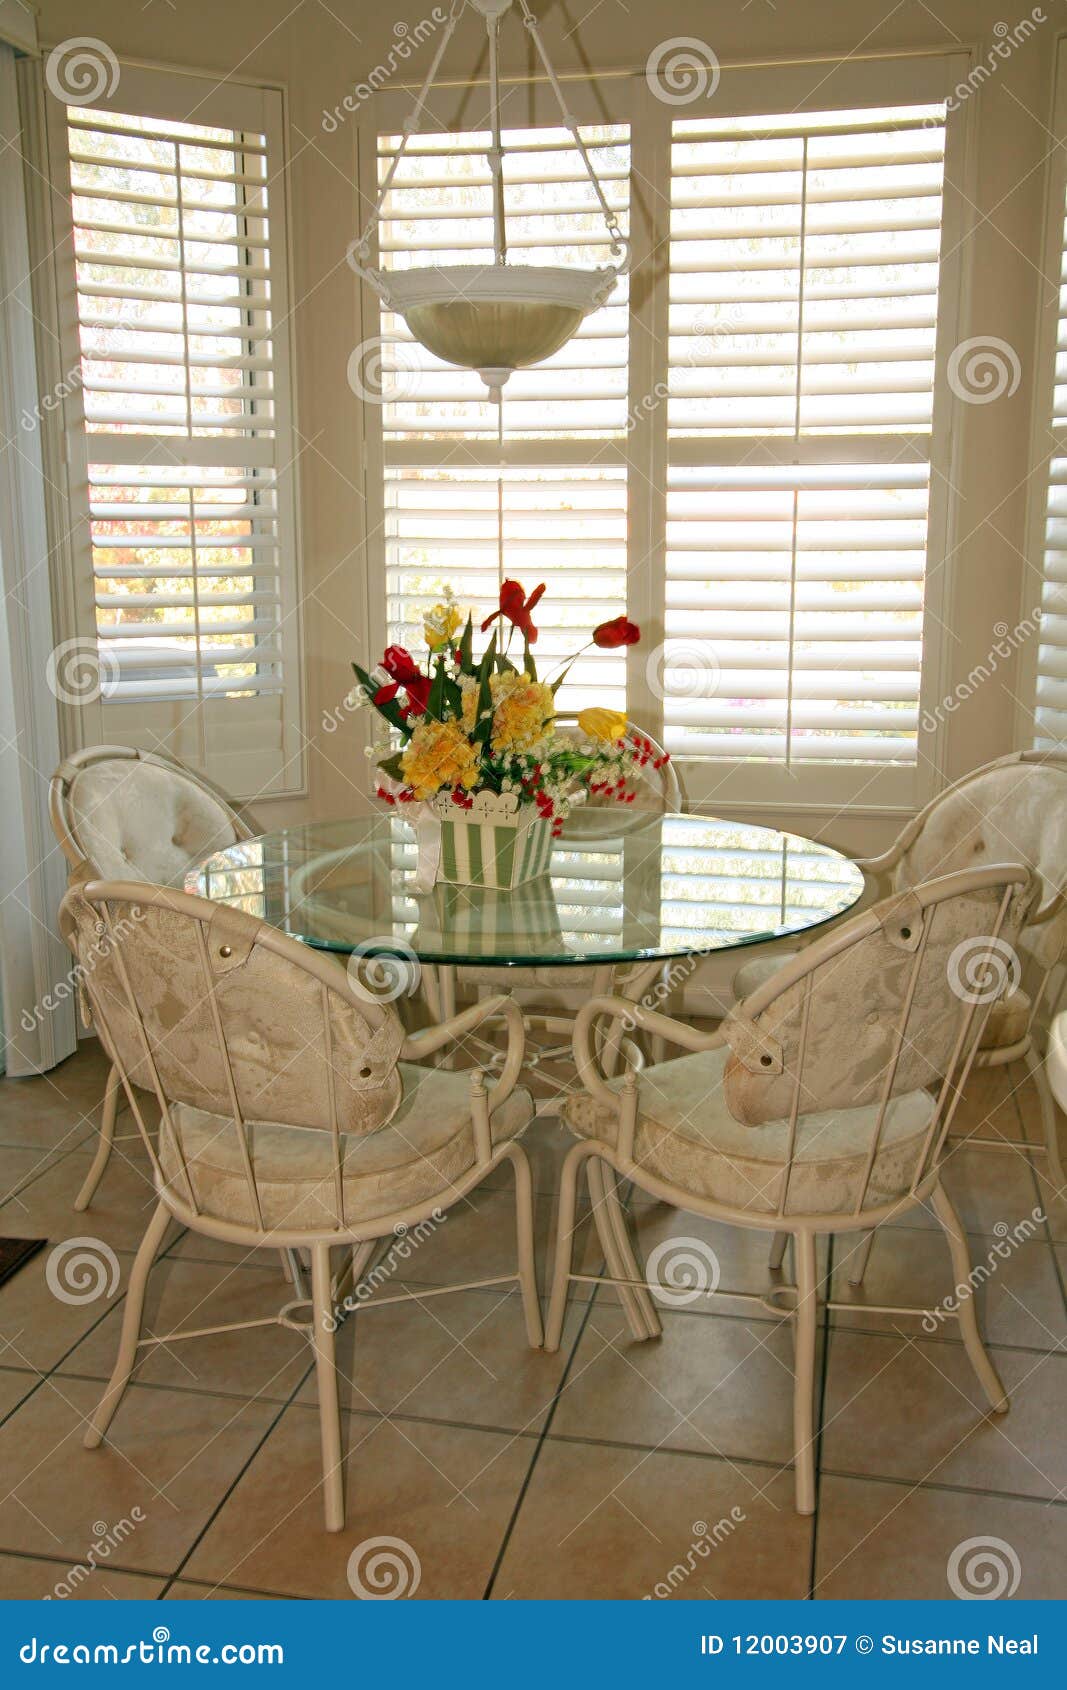 bright dining room with shutters